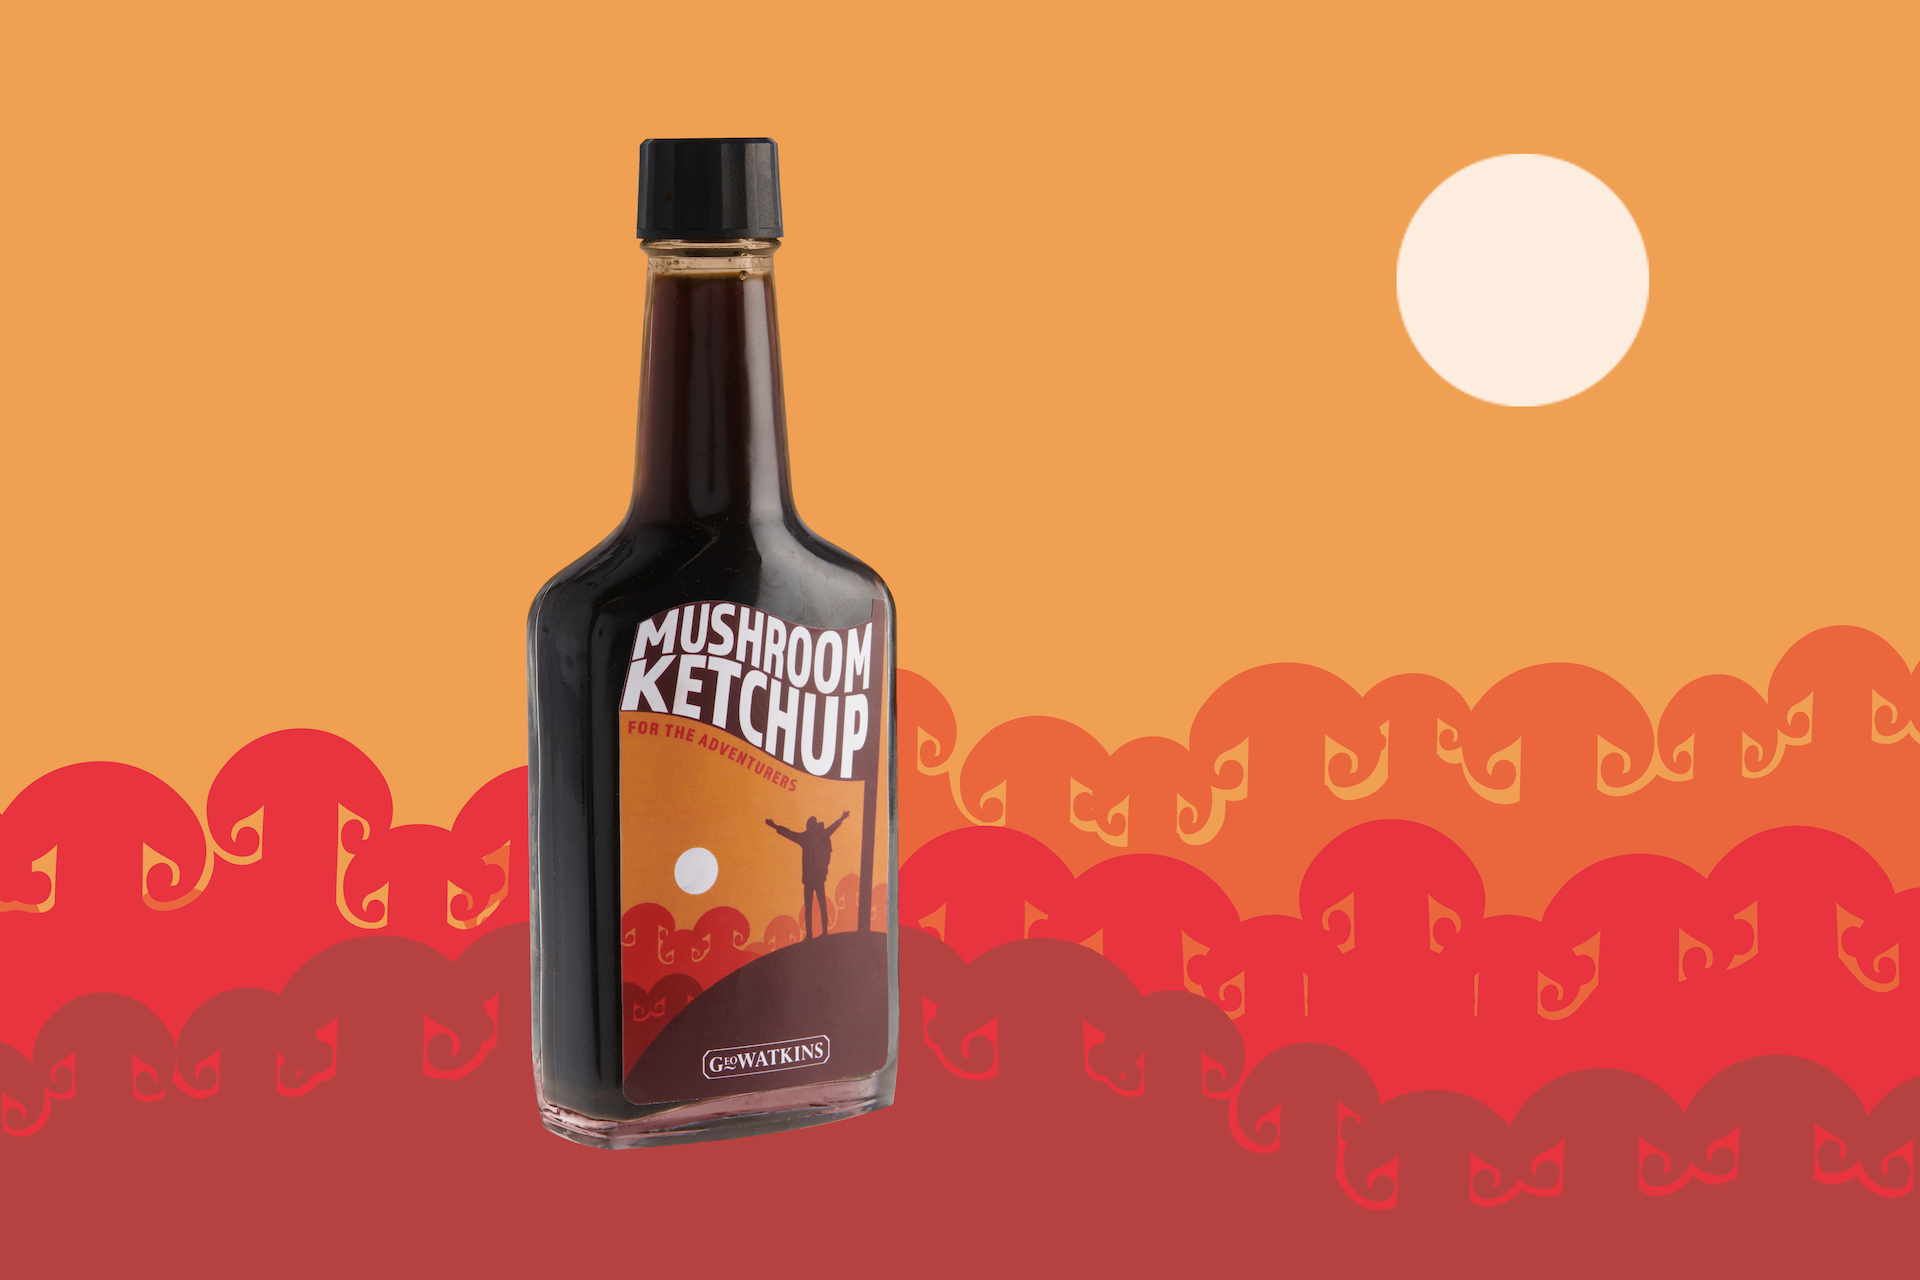 BA Graphic Design work by Rose Taylor-Townshend showcasing a rebrand for Mushroom Ketchup. It has a human silhouette on a giant mushroom with a flag and several mushrooms in the background.